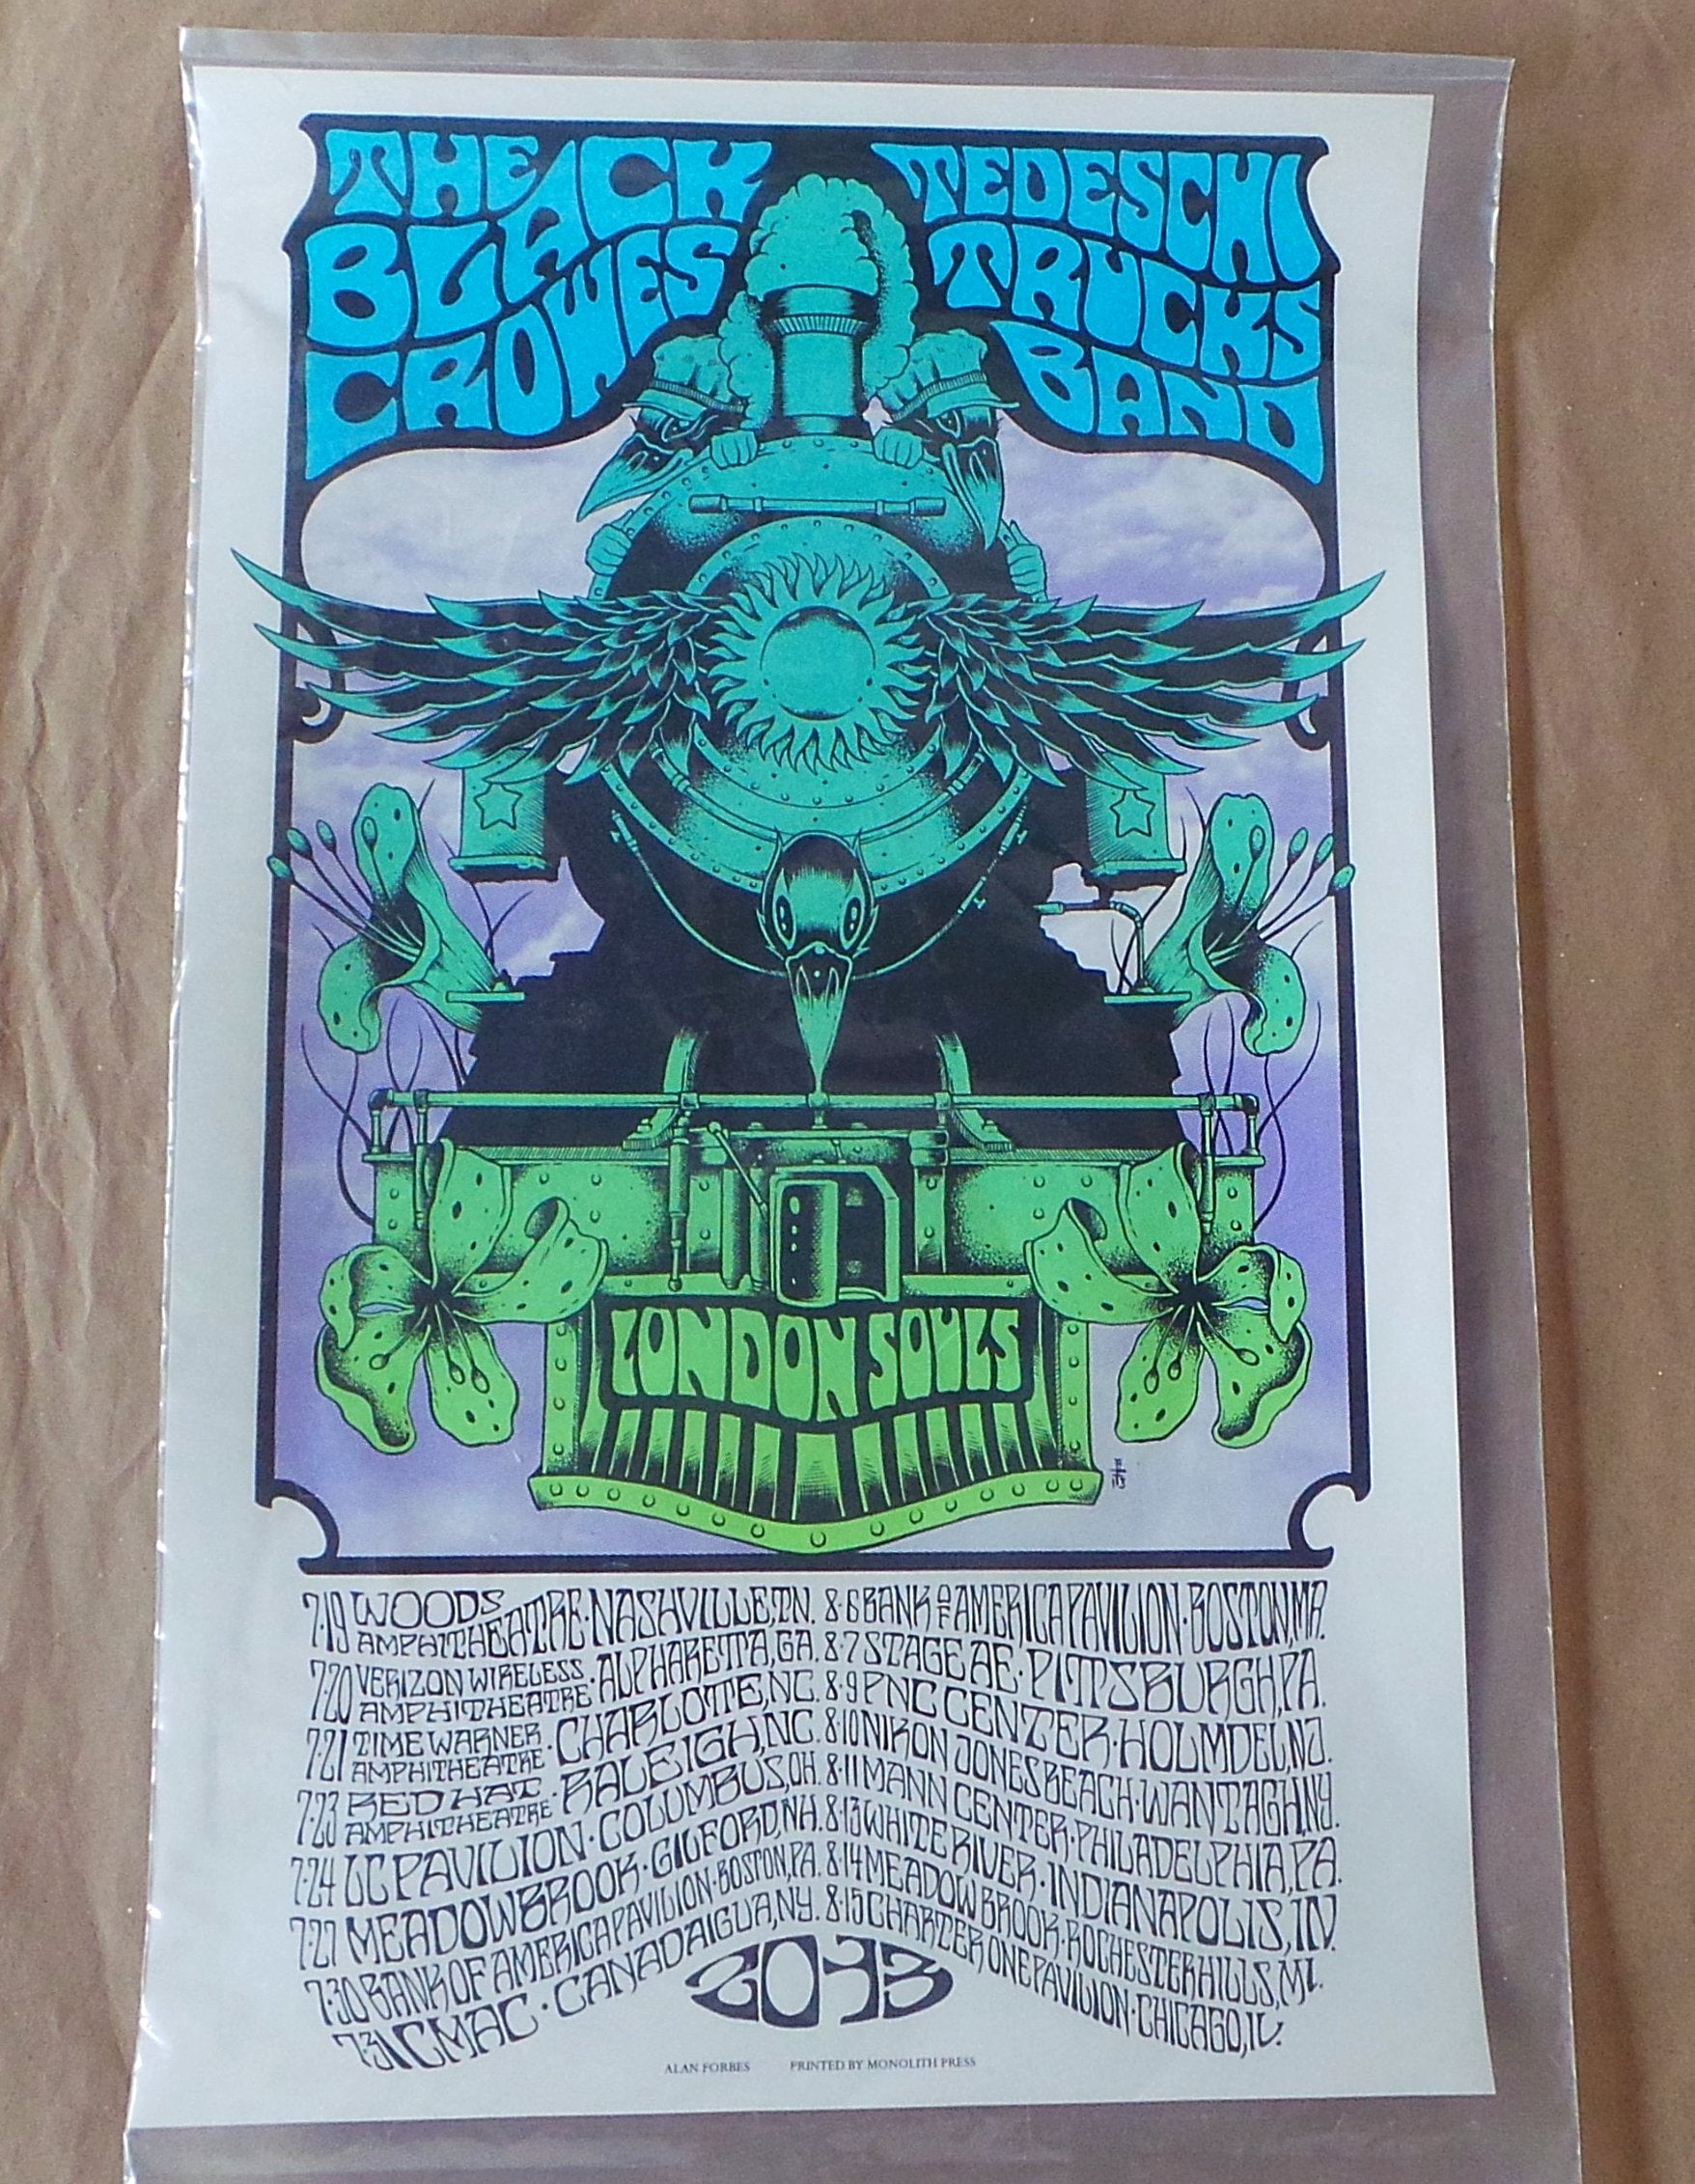 Black Crowes With Tedeschi Trucks Band And London Souls 2013 Tour Poster